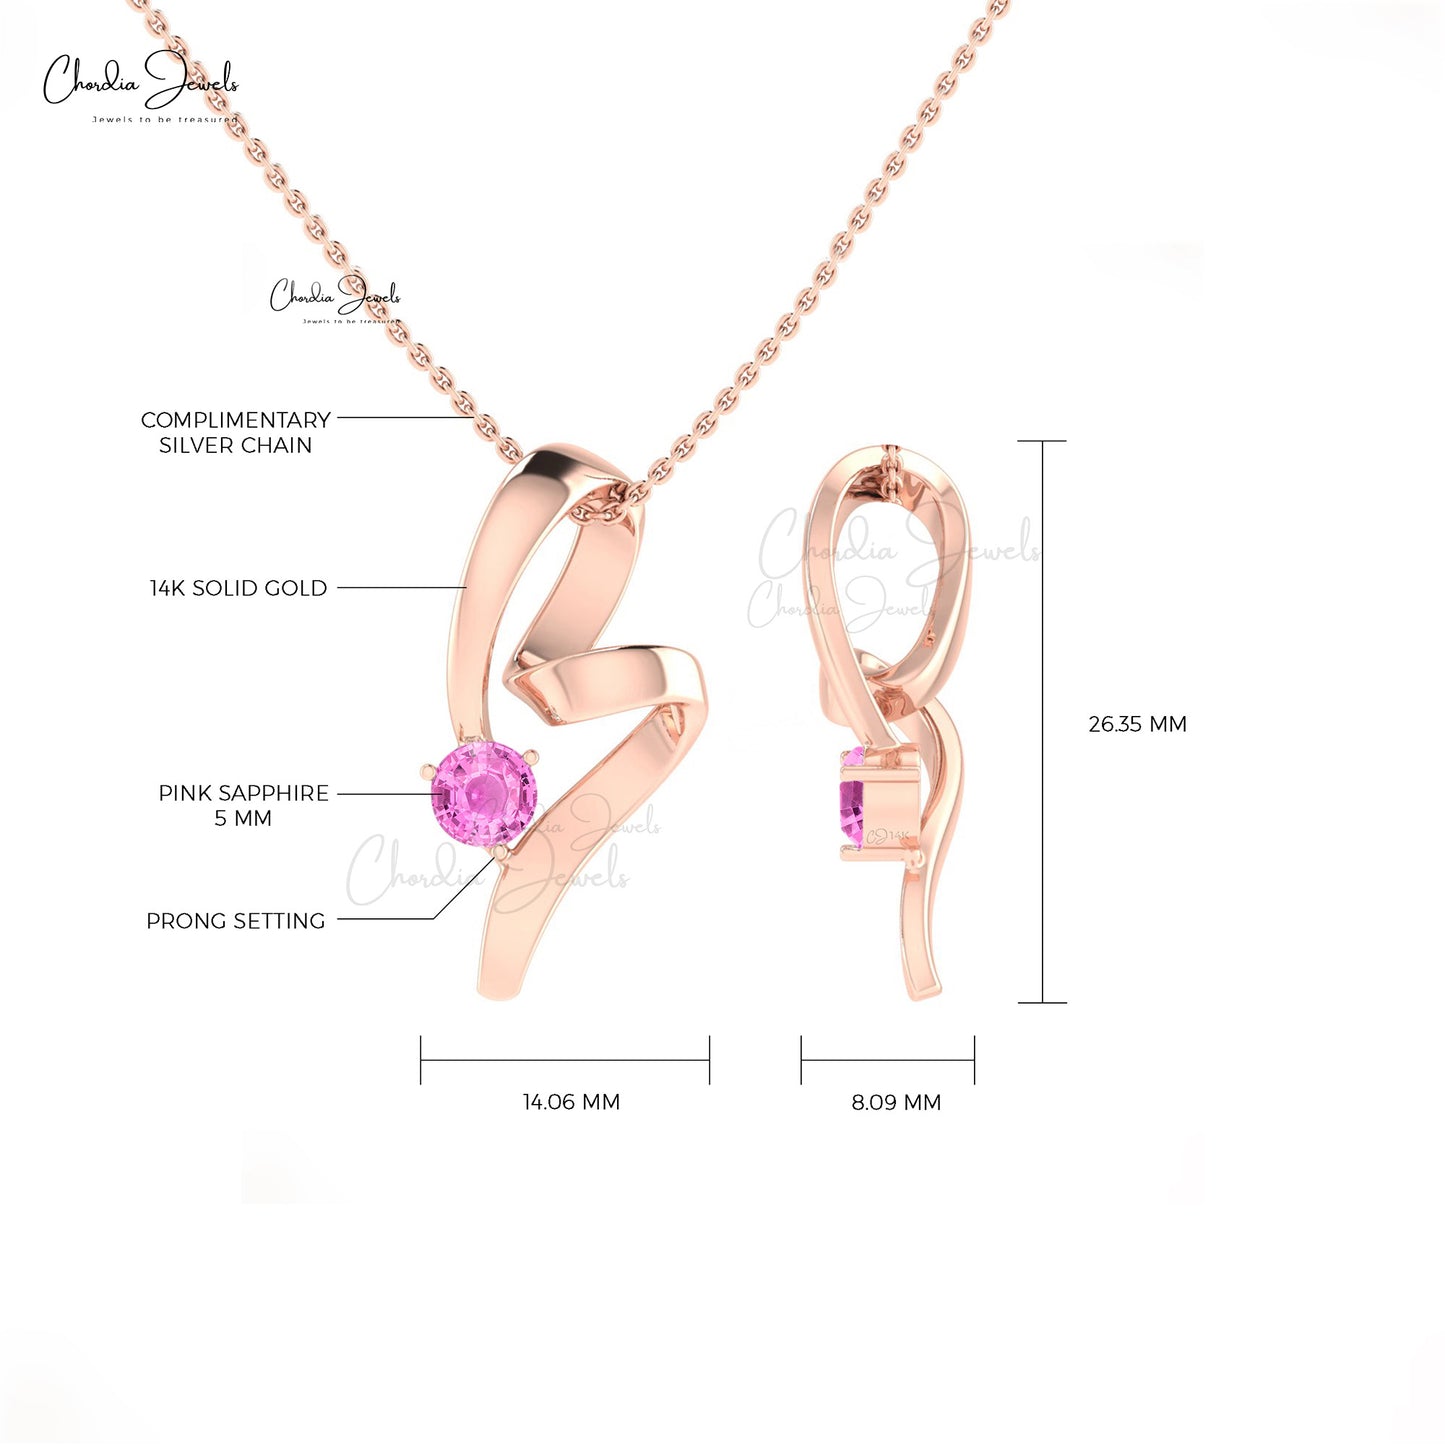 Delicate Twisted Women Pendant With Pink Sapphire Gemstone